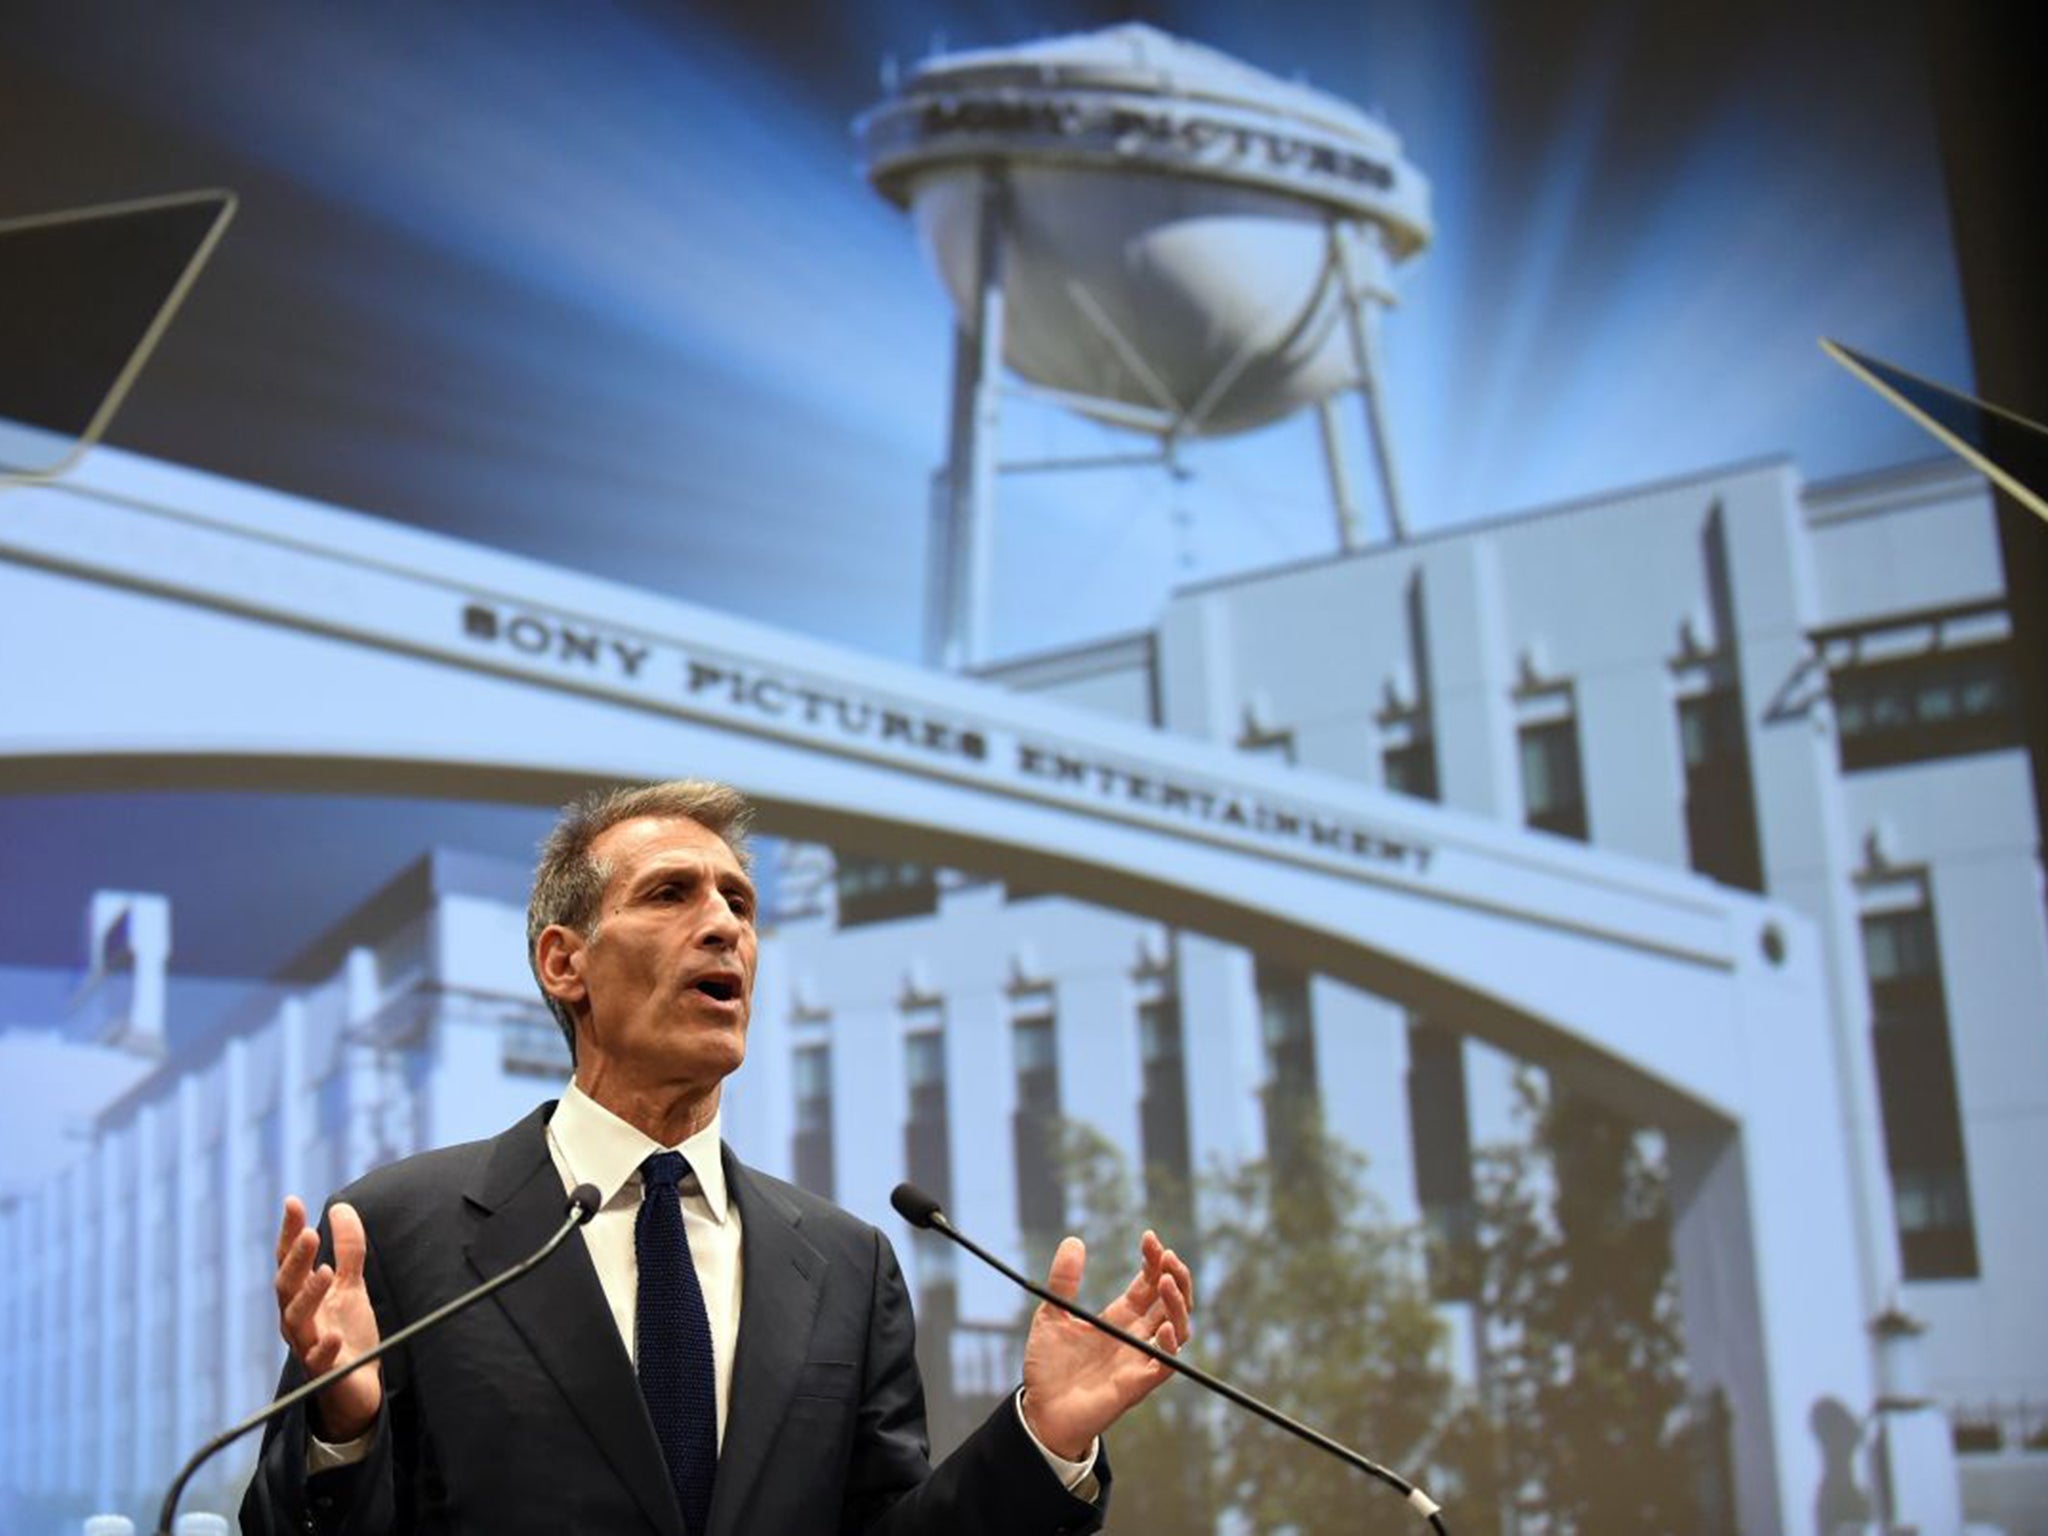 Michael Lynton, head of Sony Pictures, says he was ‘forced’ to cancel release of ‘The Interview’ (AFP/Getty)